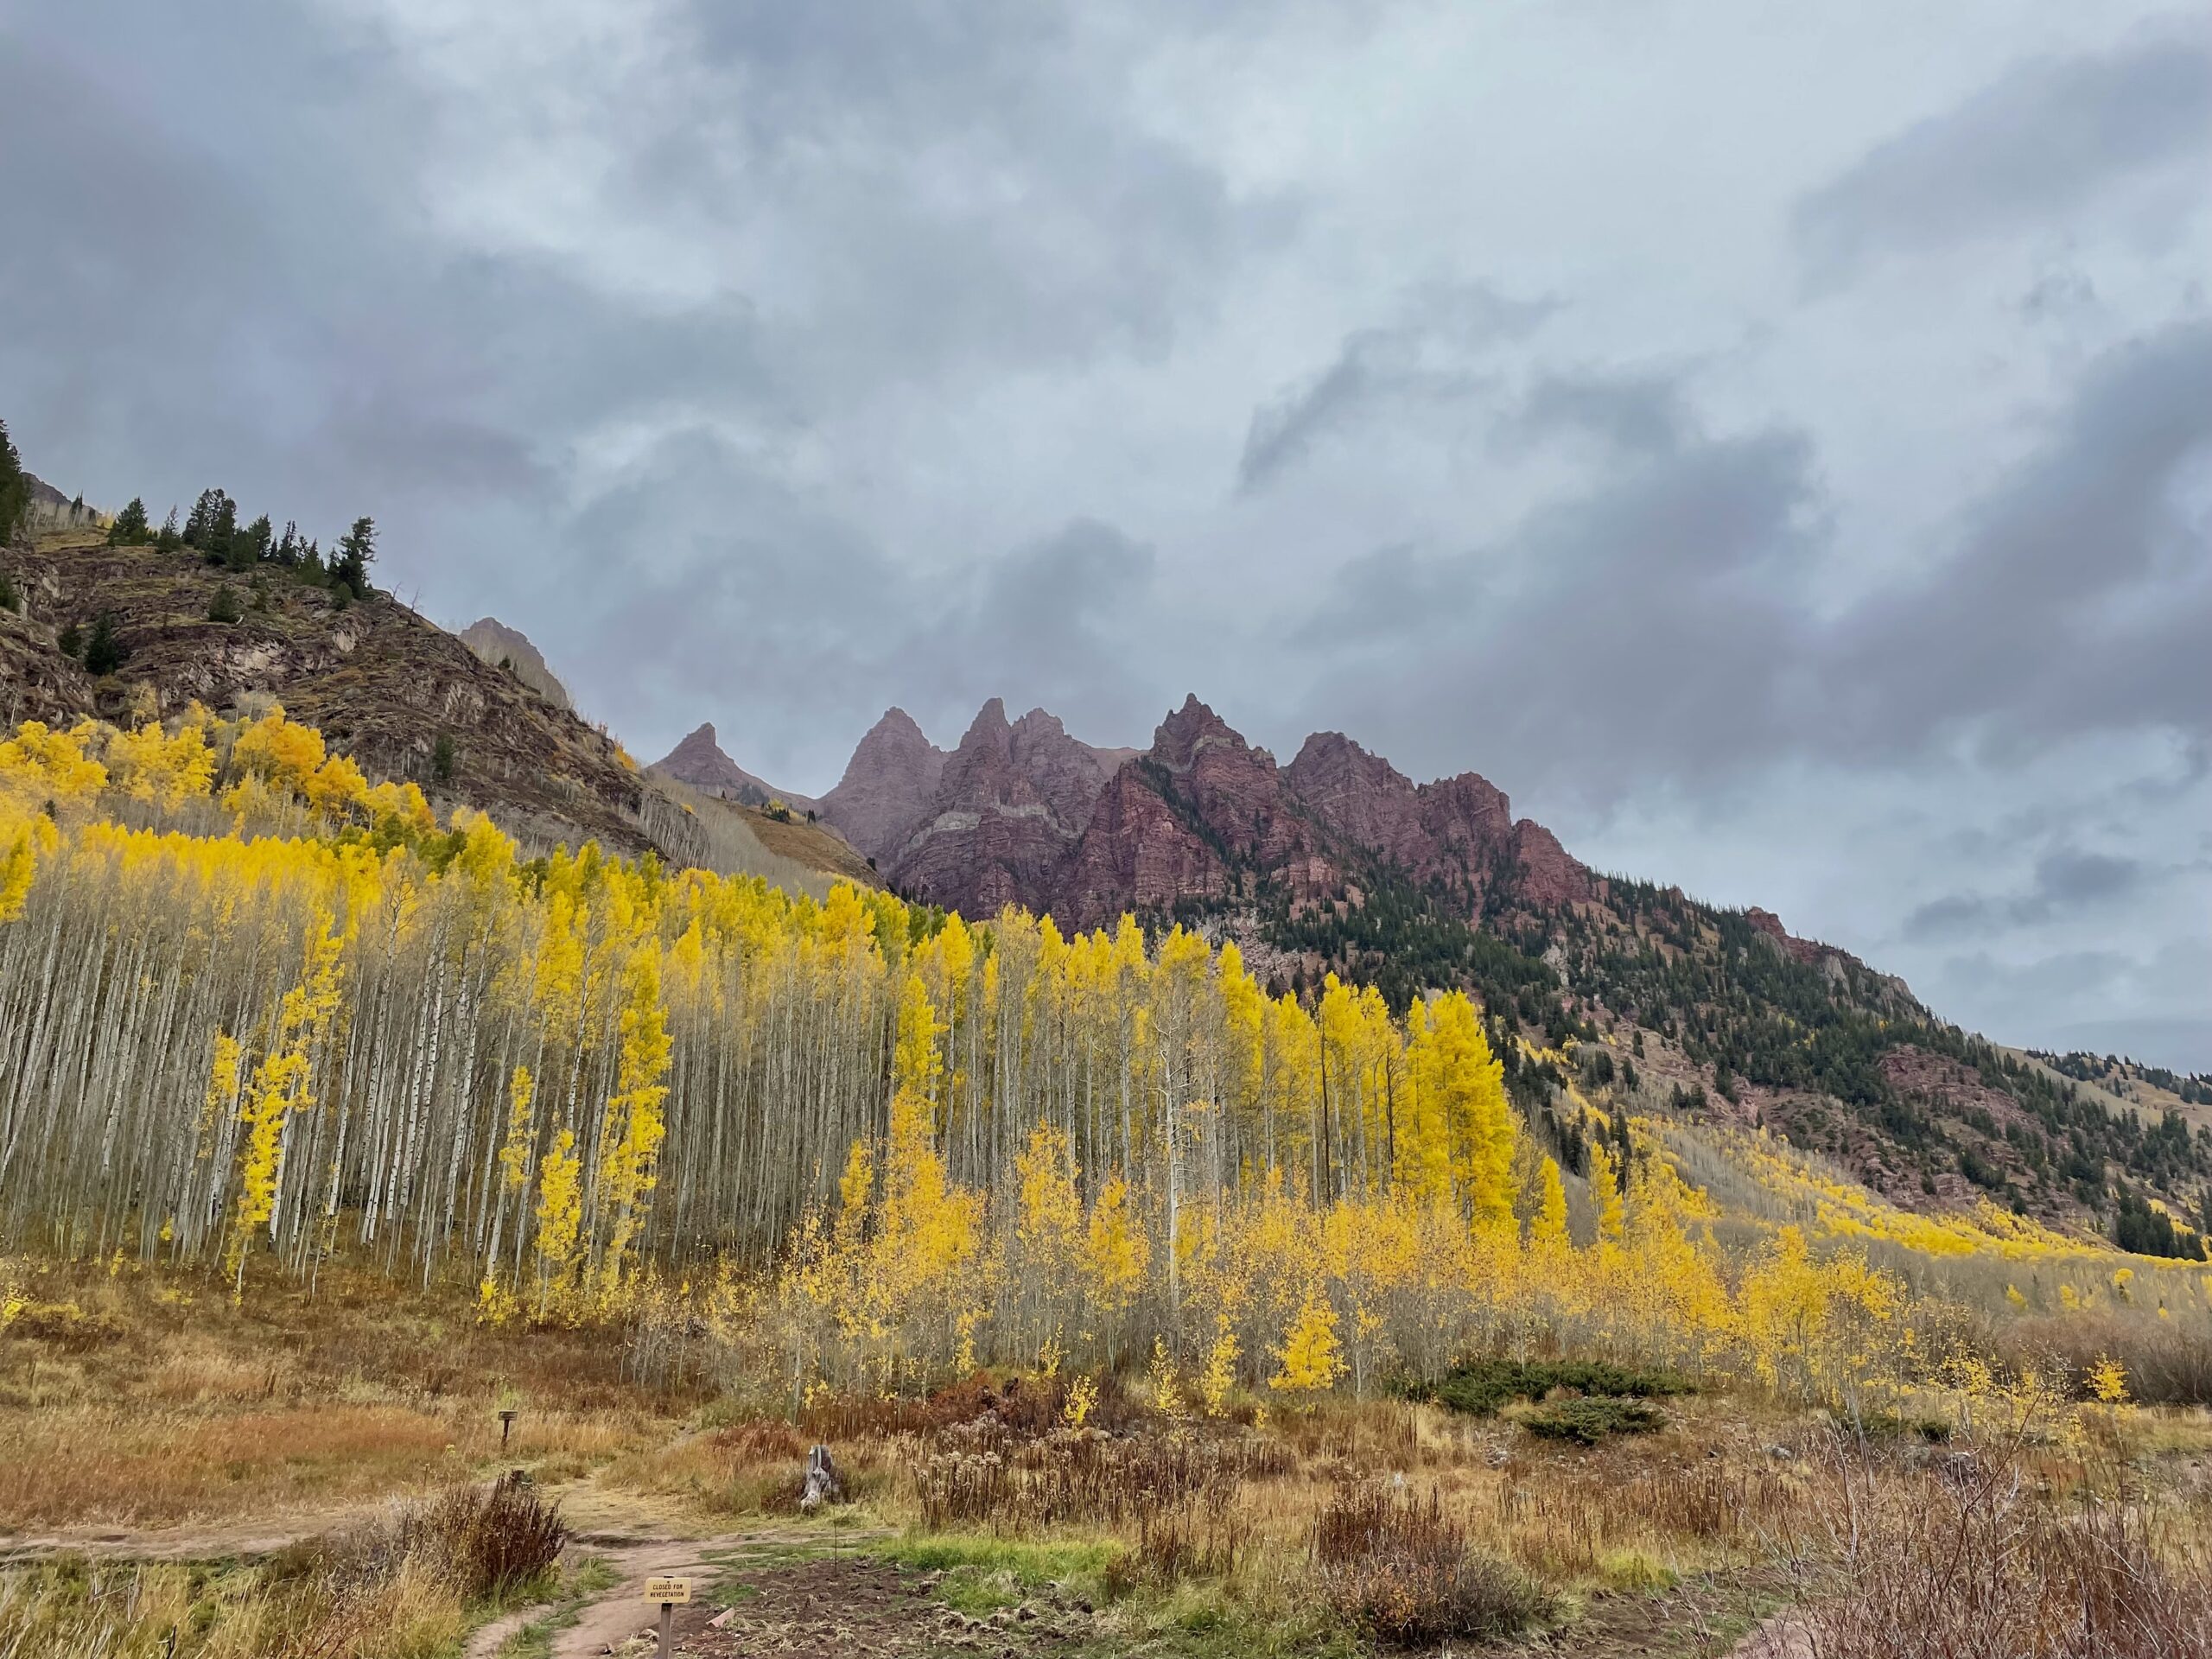 A misty landscape of yellow aspen trees and red mountains